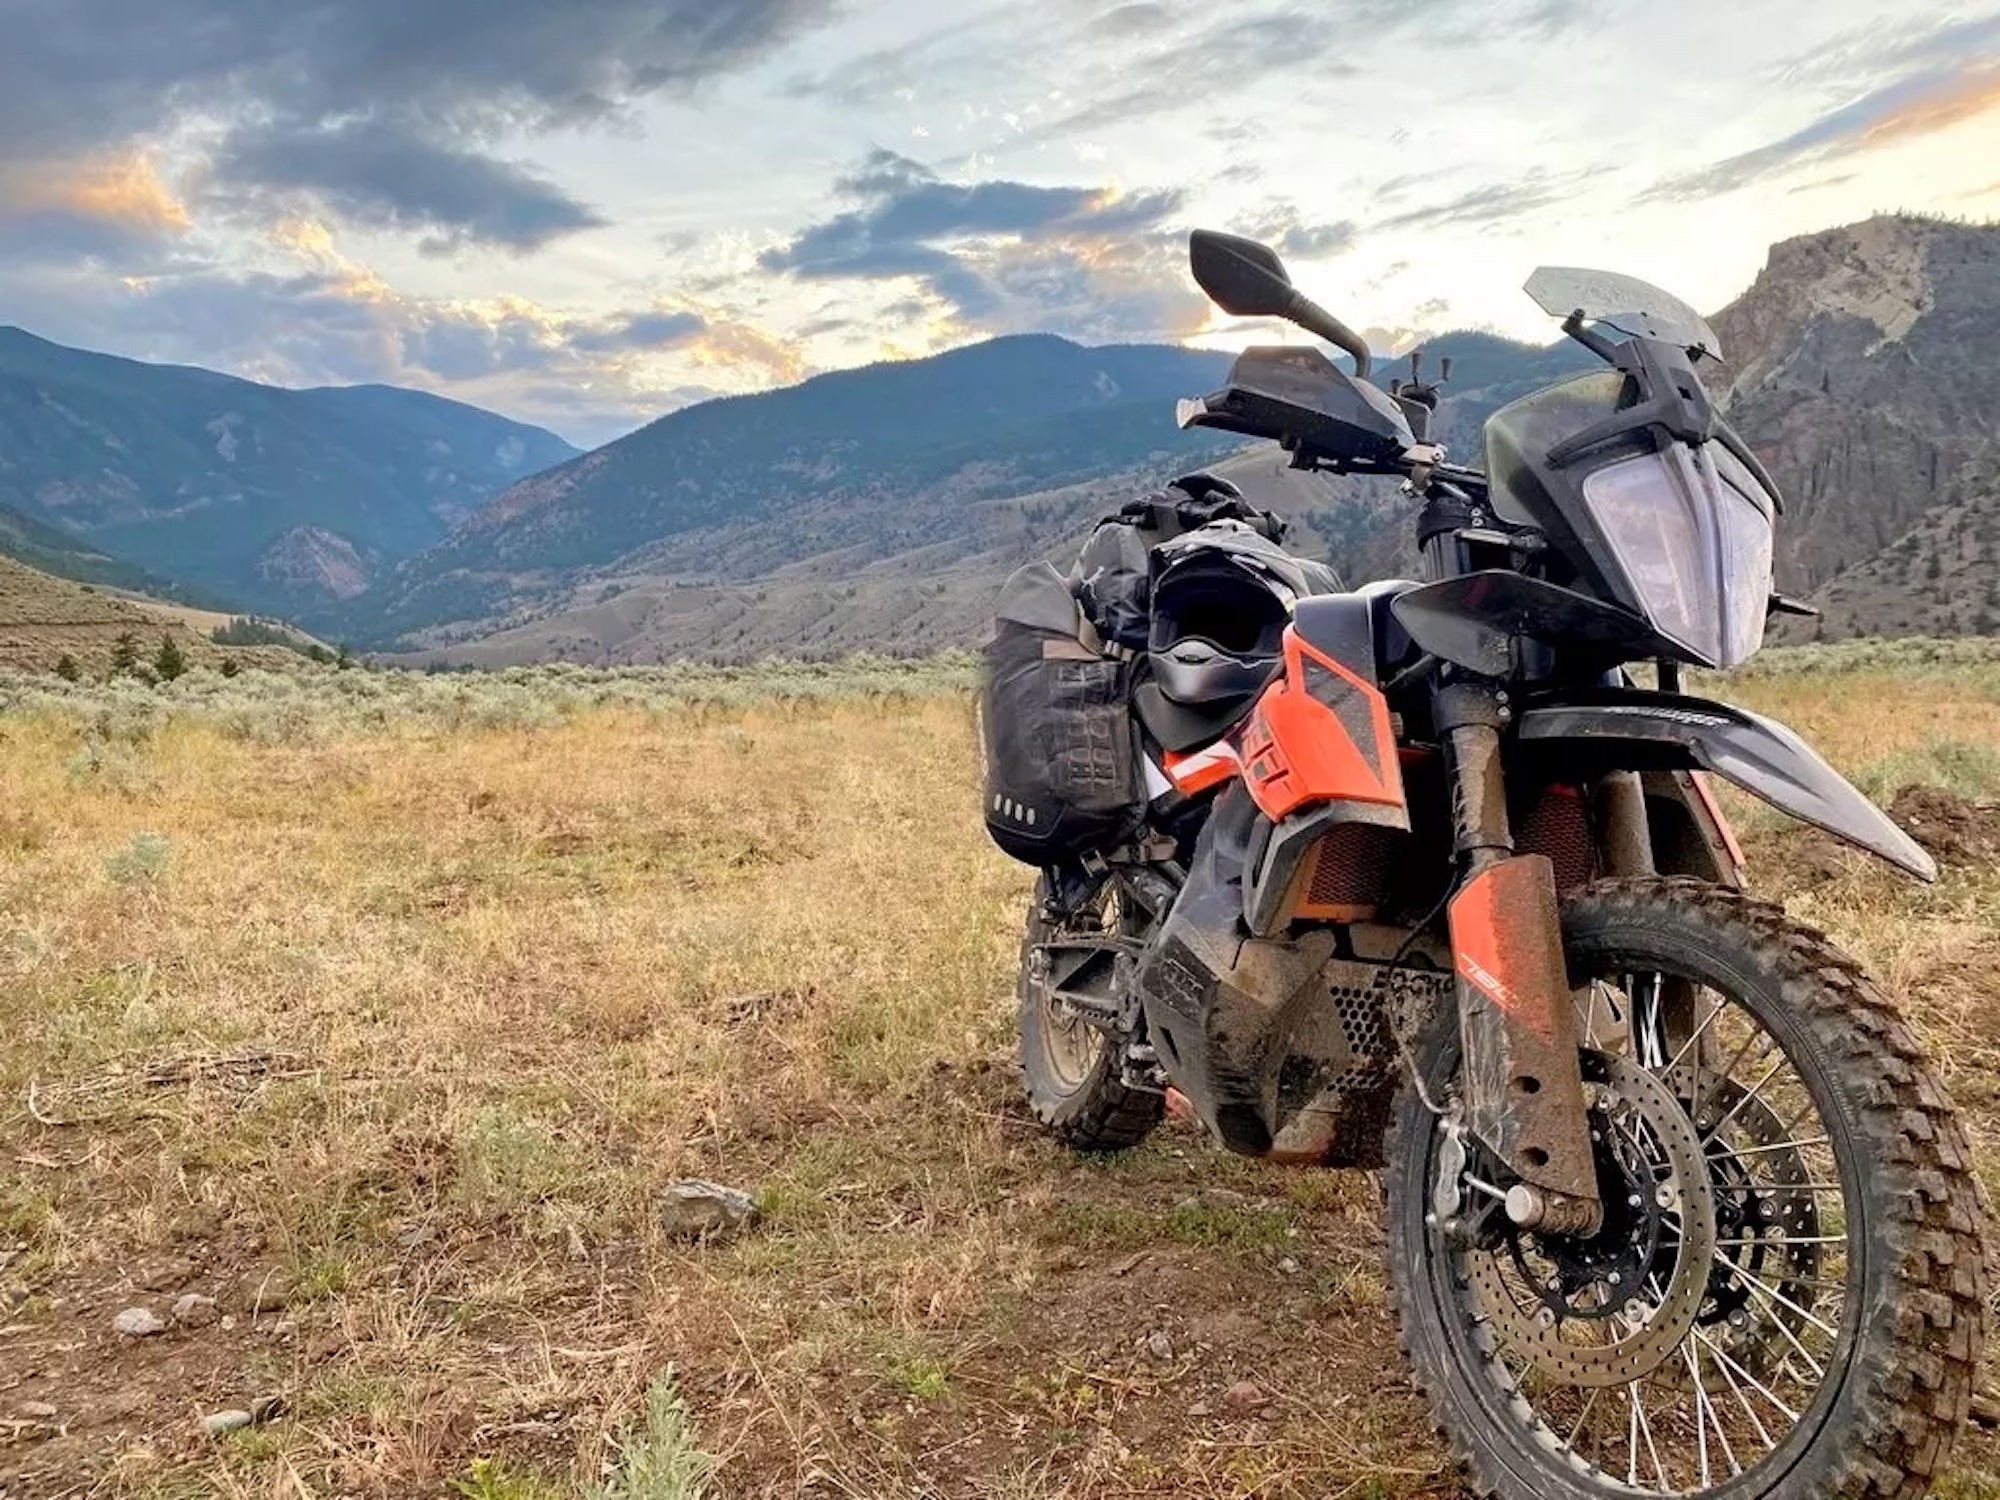 Jim Pruner's ride review on the 2019 KTM 790 Adventure. Media rights reserved for WBW and Jim Pruner. 